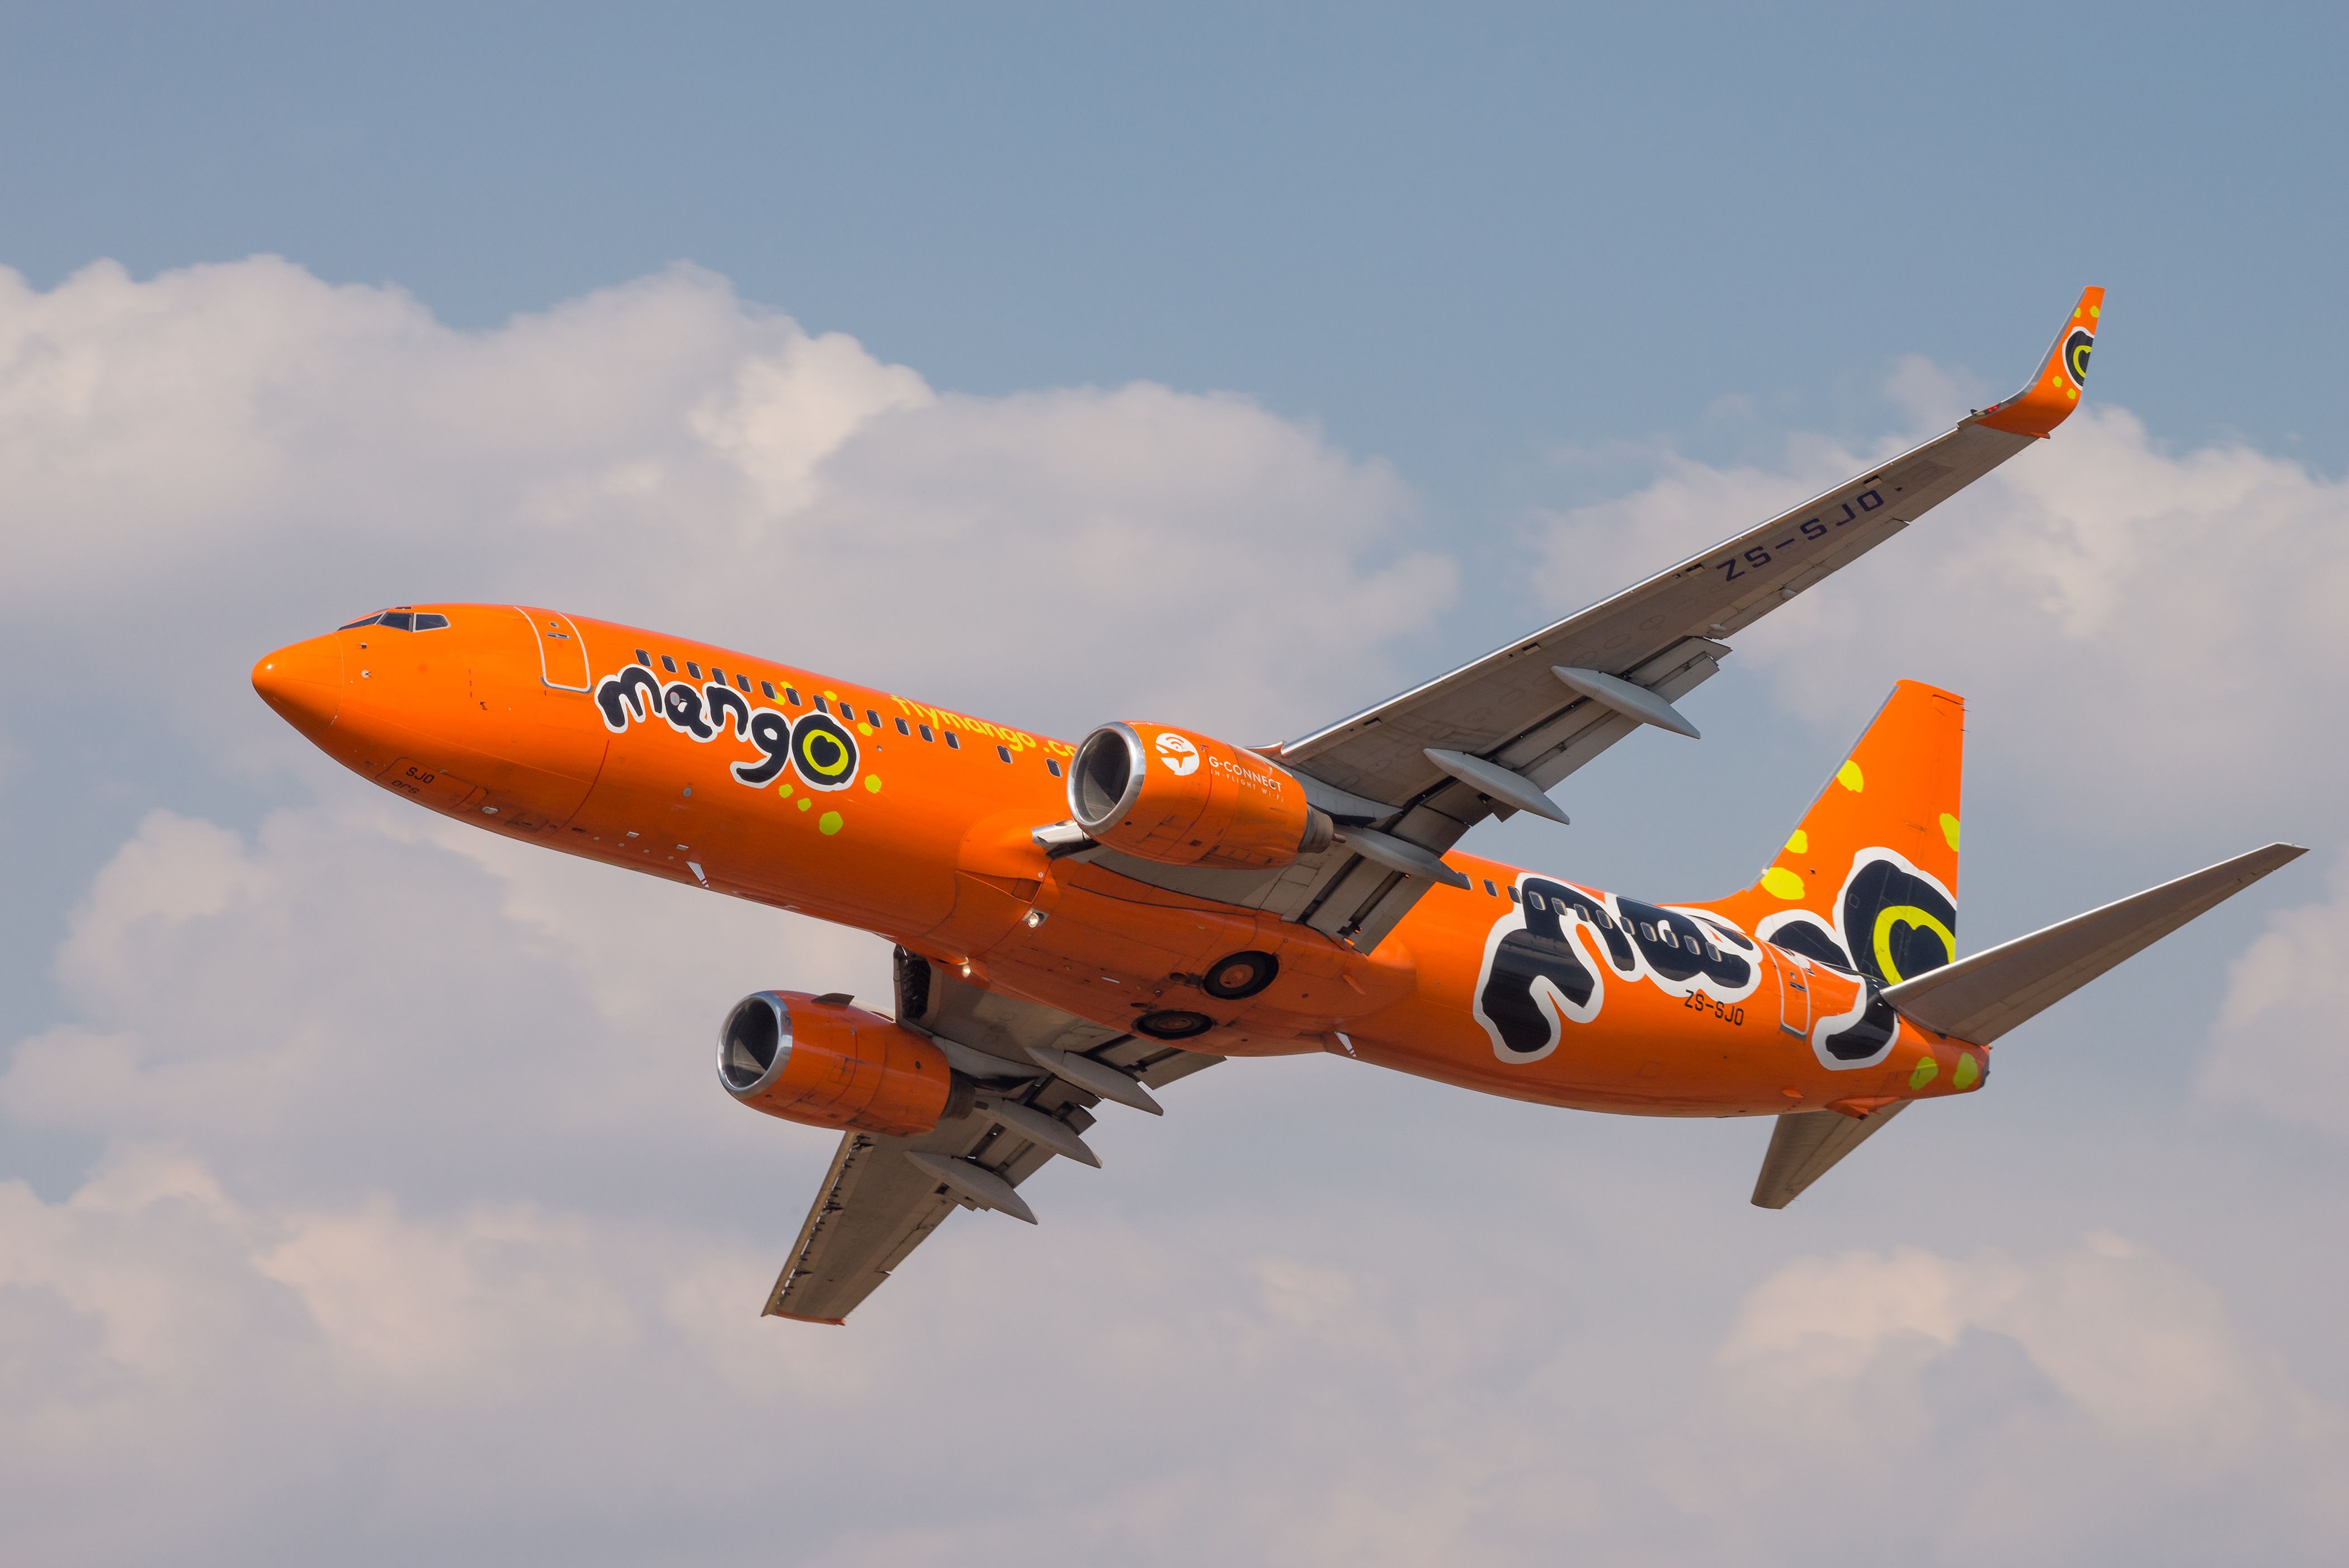 Mango Airlines Boeing 737 aircraft